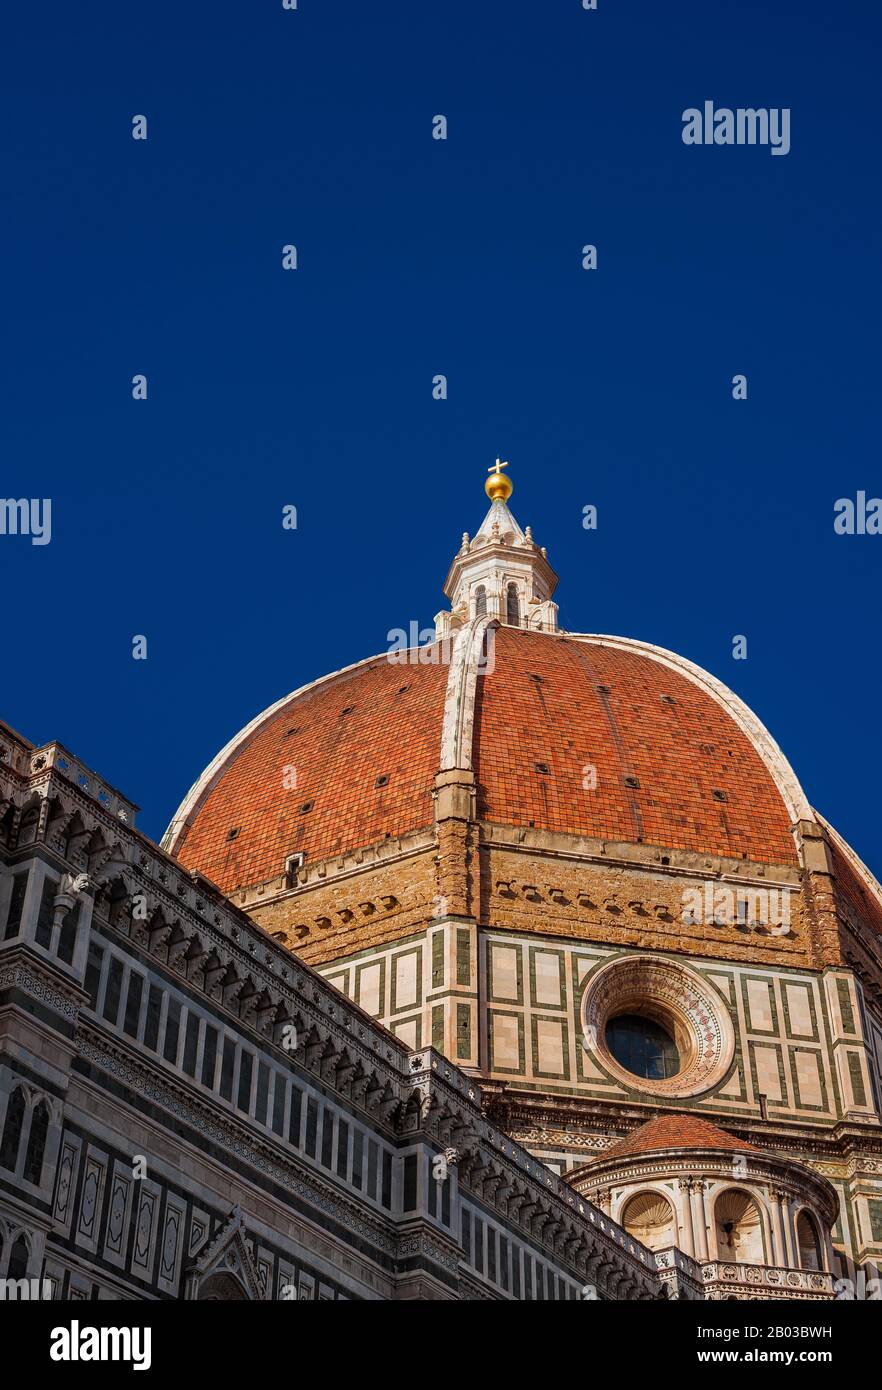 St Mary of the Flower iconic dome in Florence seen from below, built by italian architect Brunelleschi in the 15th century and symbol of Renaissance i Stock Photo